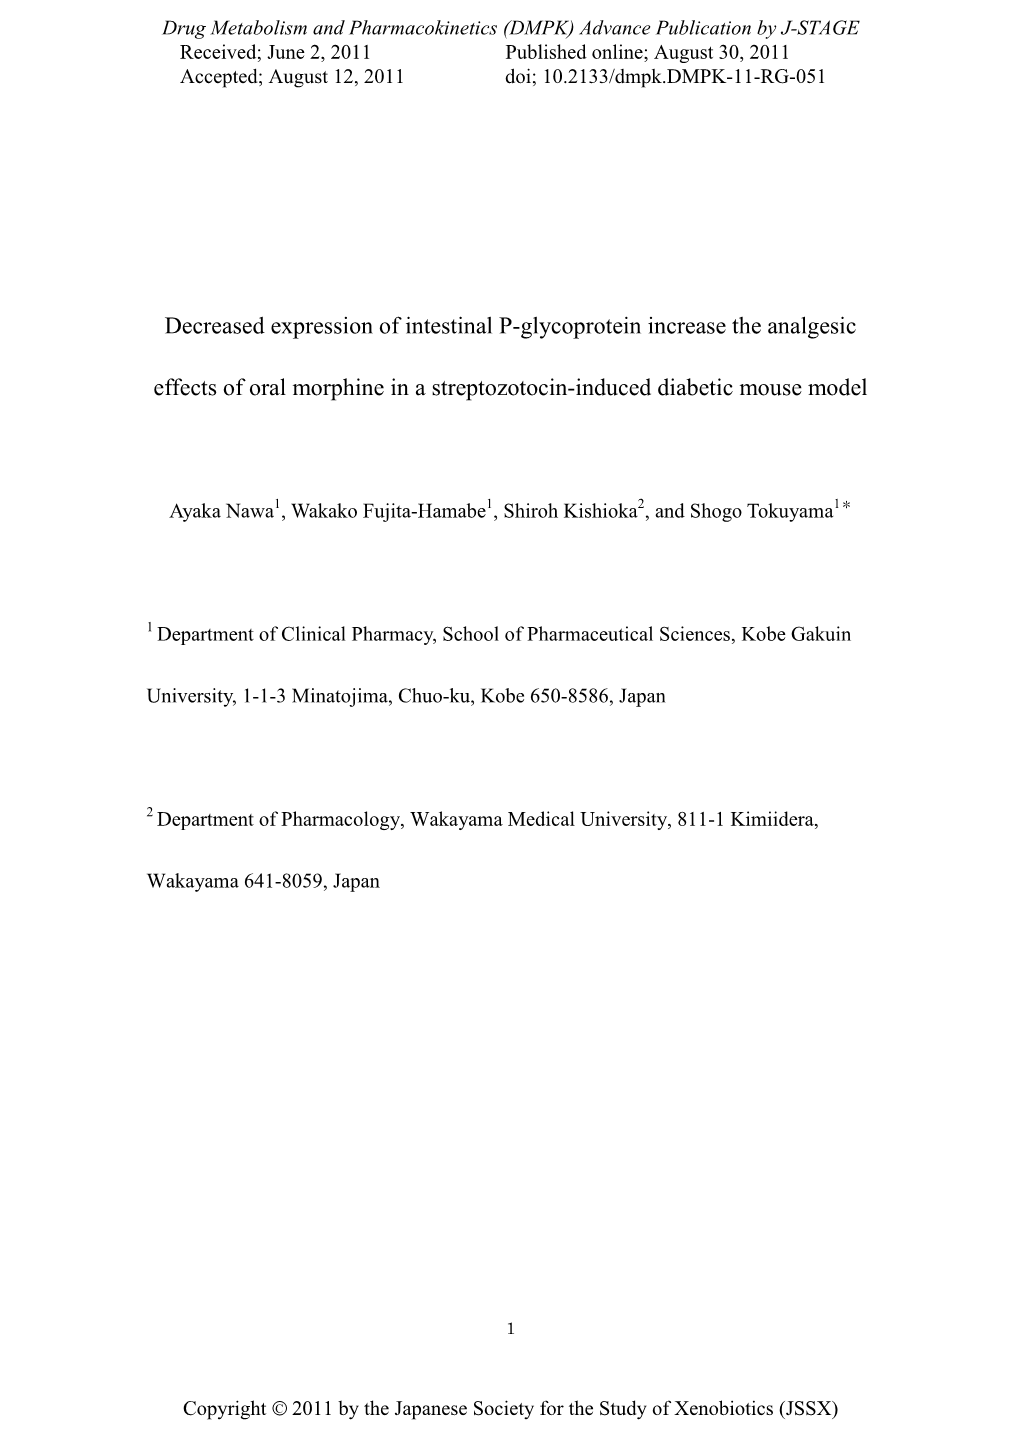 Decreased Expression of Intestinal P-Glycoprotein Increase the Analgesic Effects of Oral Morphine in a Streptozotocin-Induced Diabetic Mouse Model